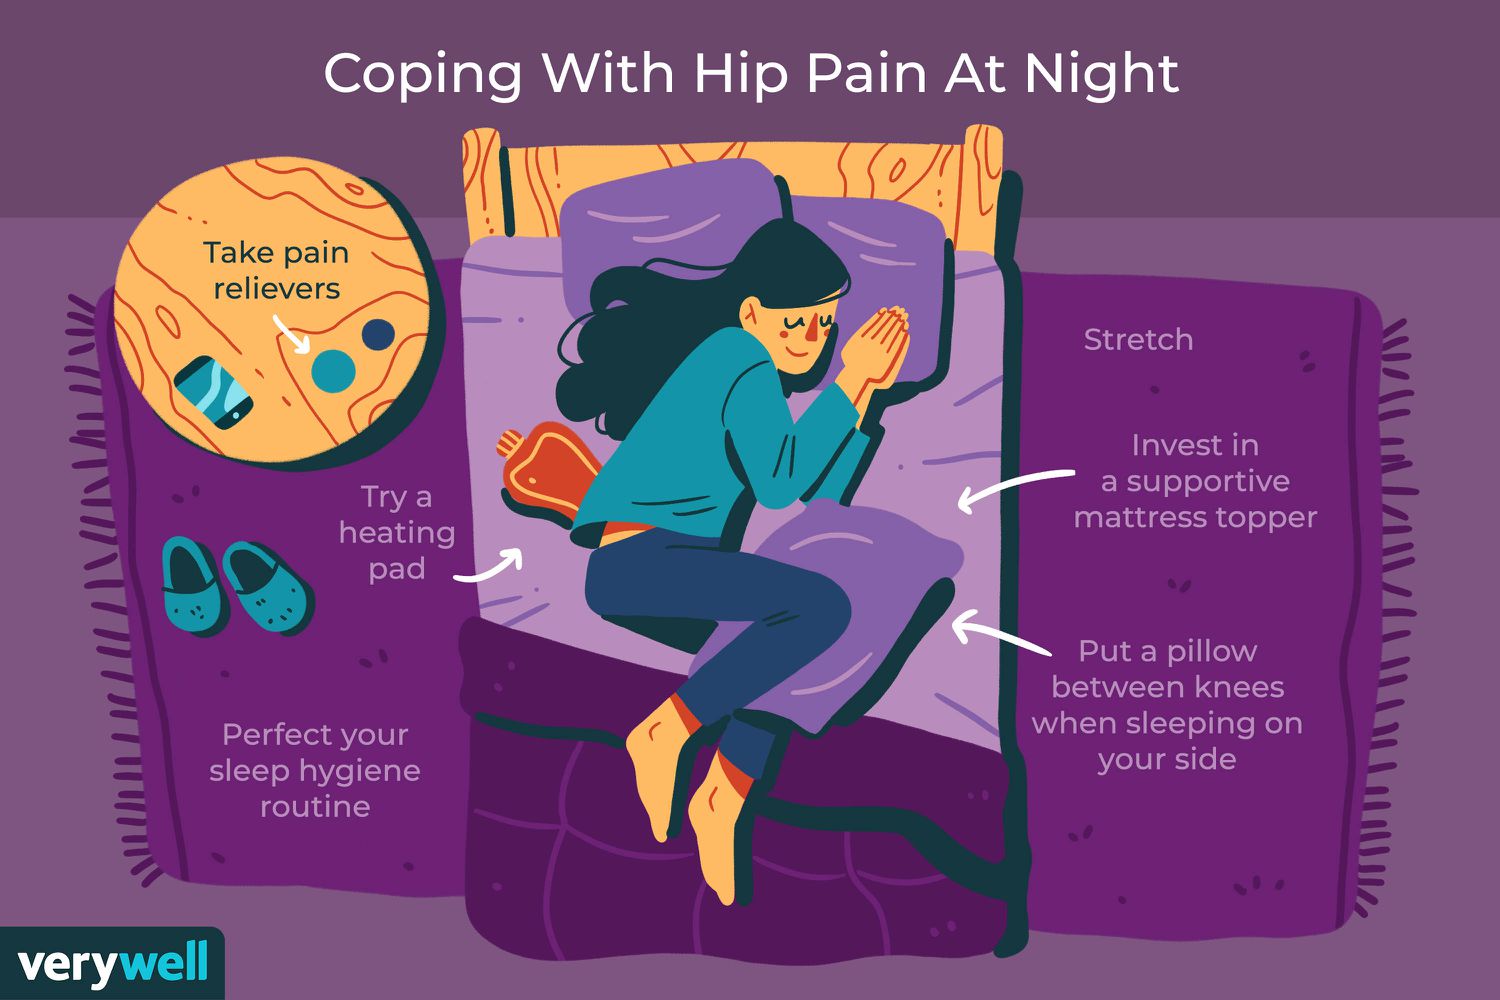 how to relieve hip pain from sleeping on side?